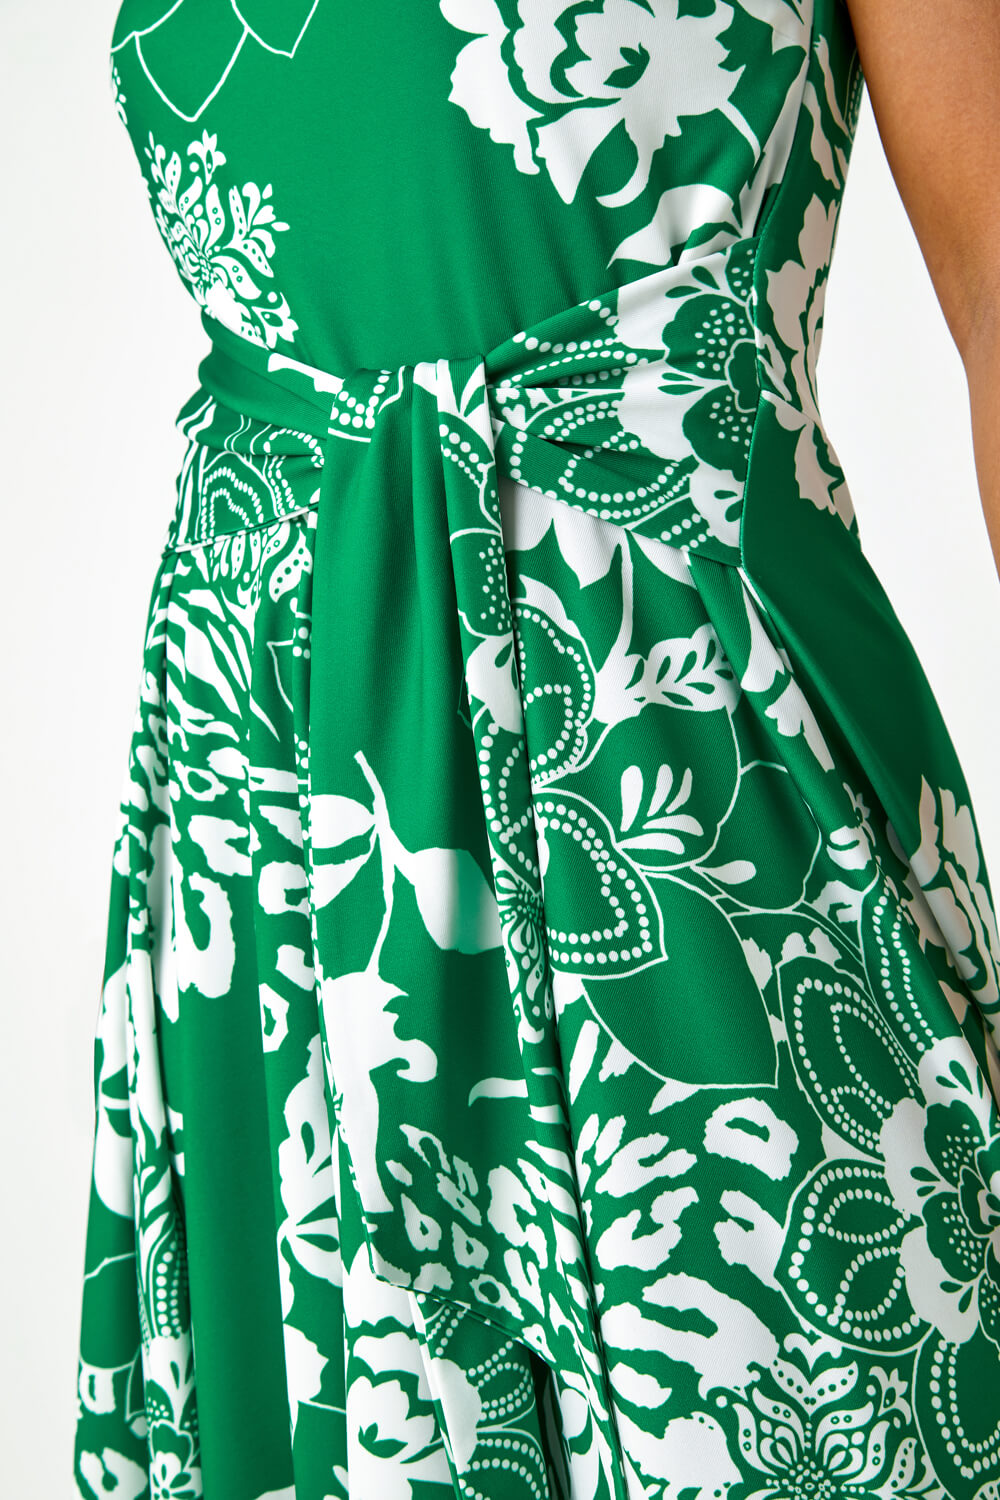 Green Petite Tie Waist Floral Stretch Dress, Image 5 of 5